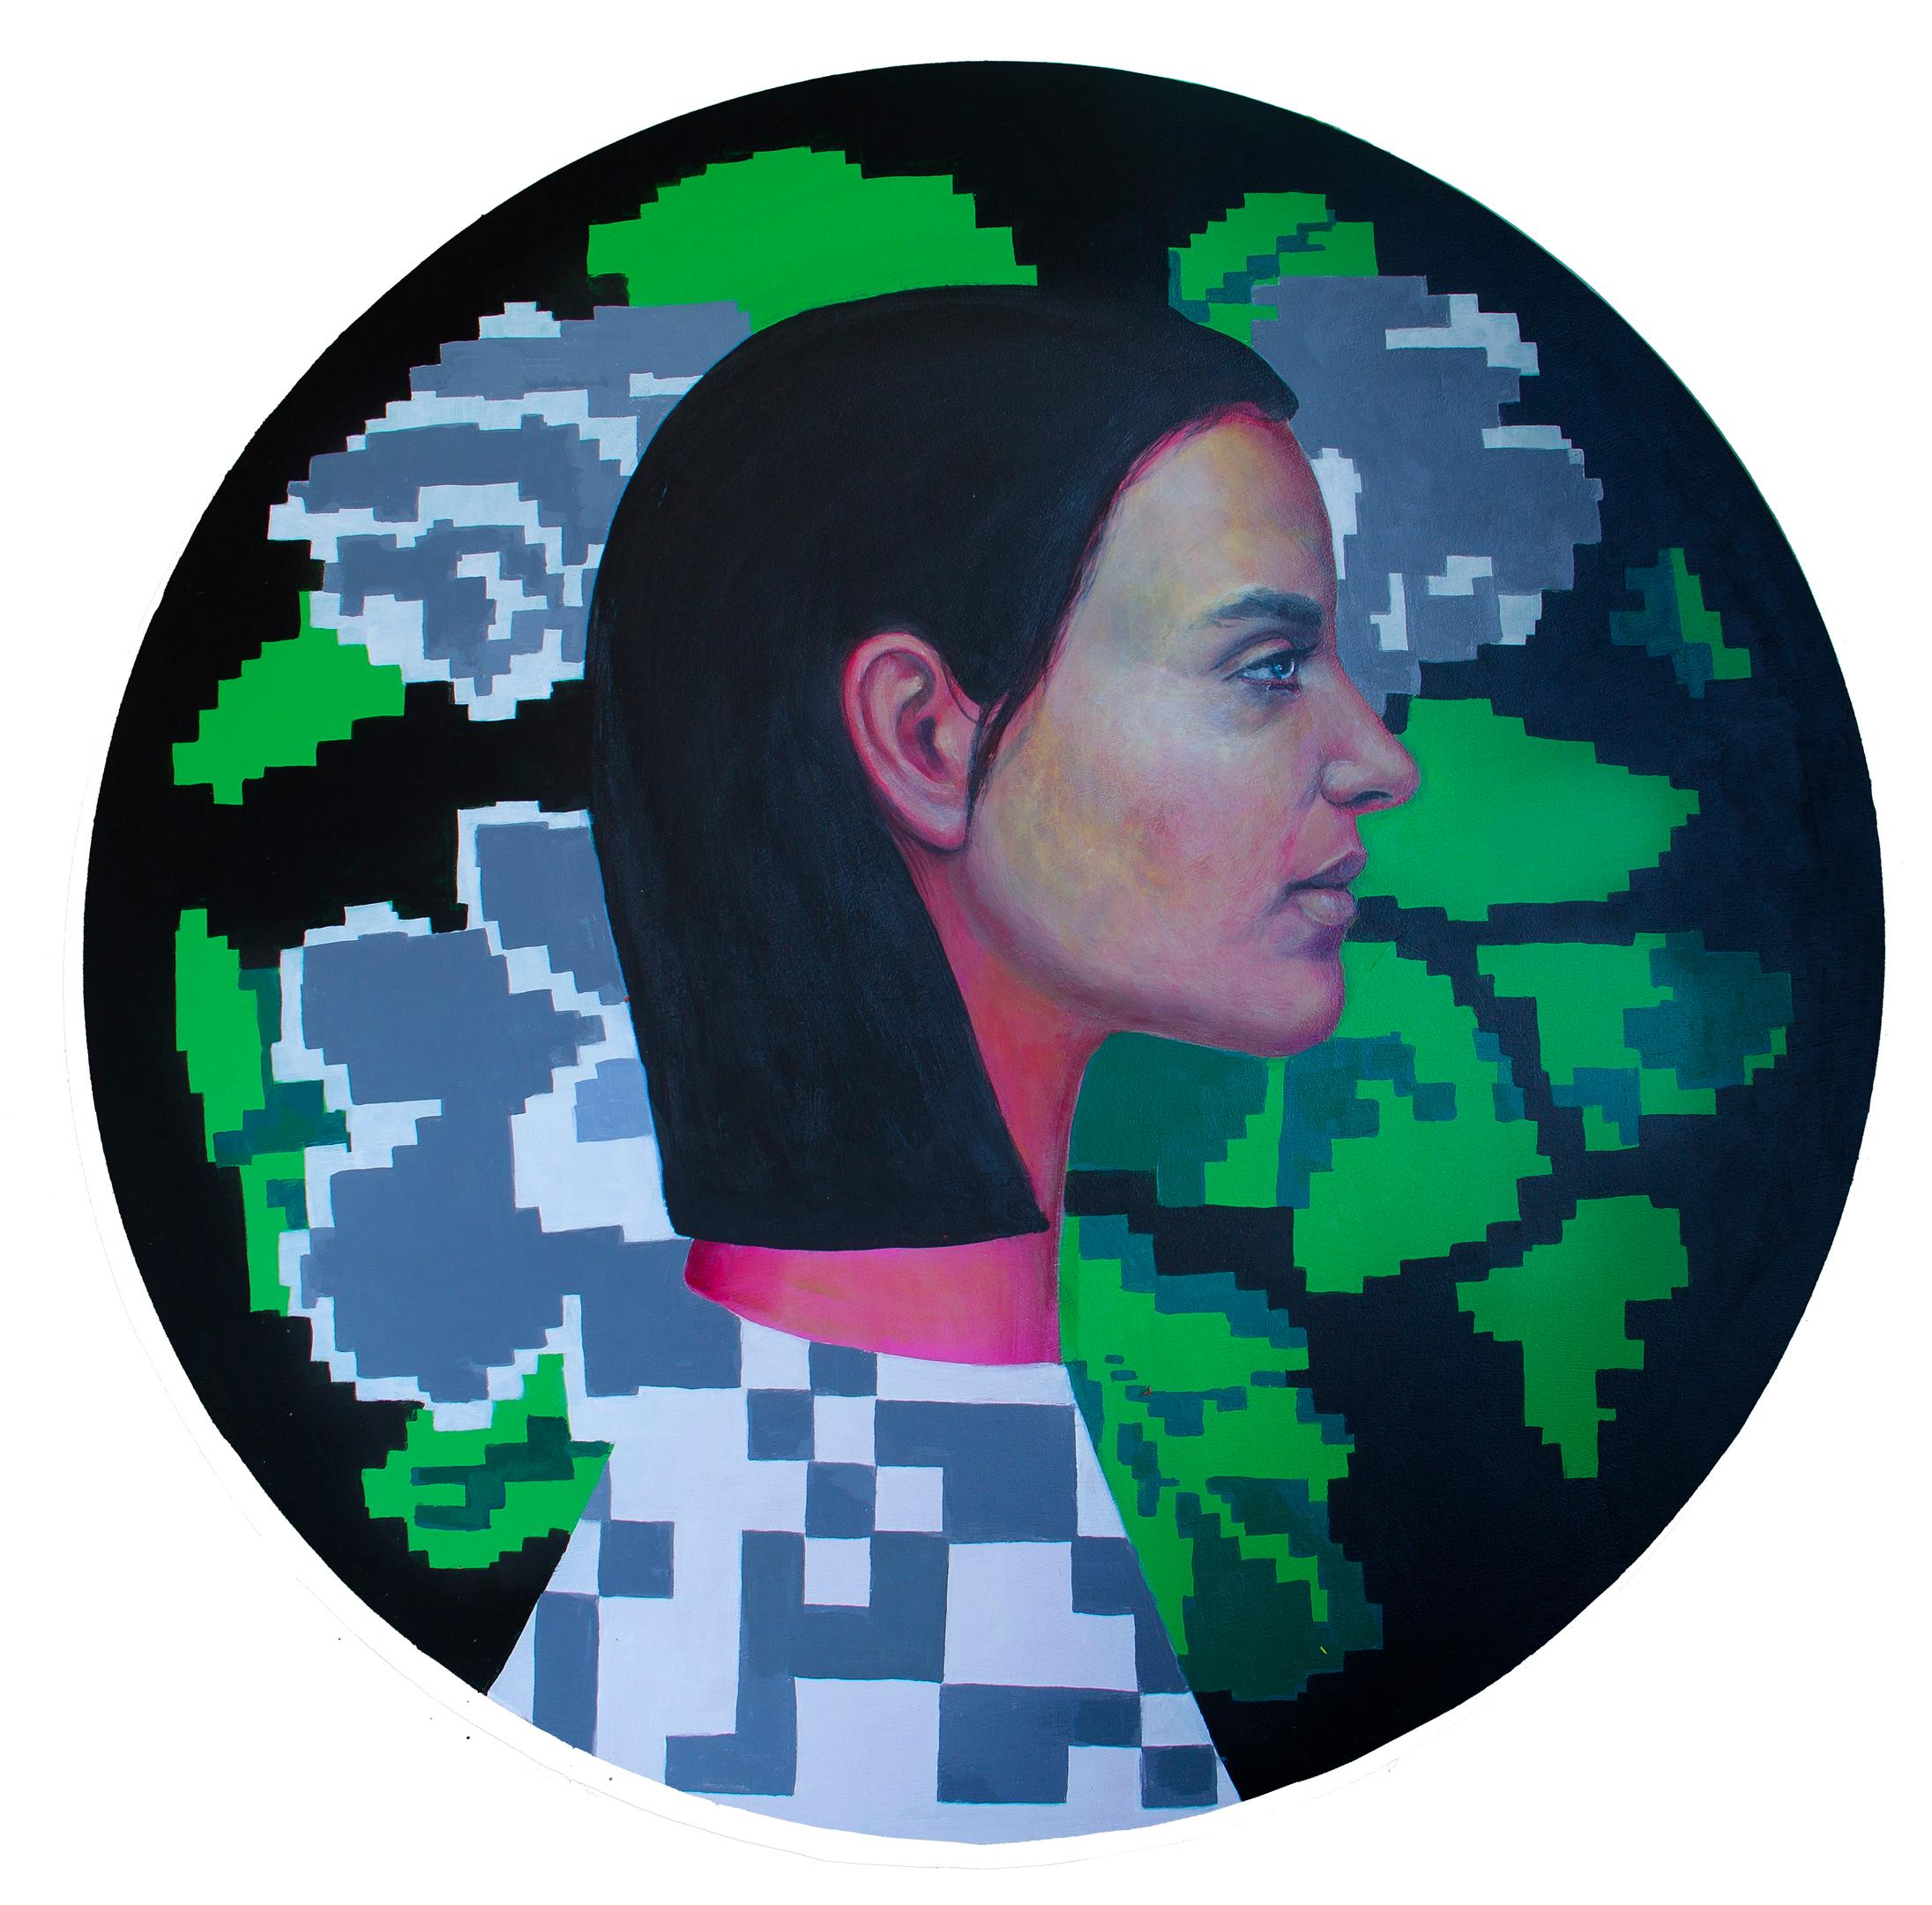 Natasha Lelenco Figurative Painting - Woman Portrait On A Wooden Circle With Flowers And Pixels. "Currency #2" 